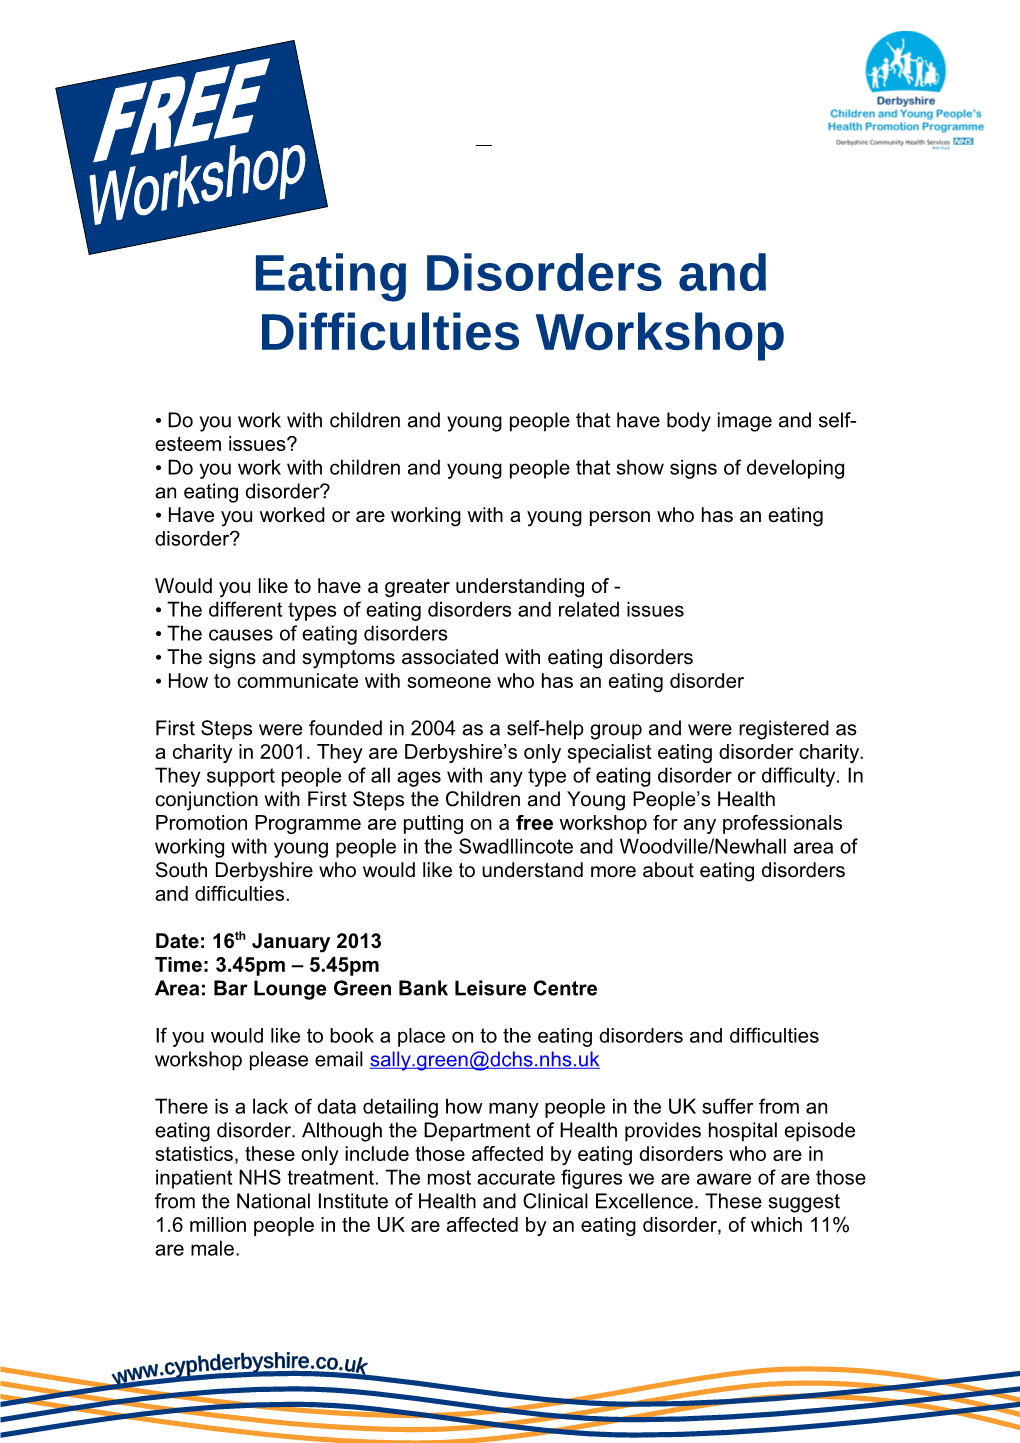 Eating Disorders and Difficulties Workshop